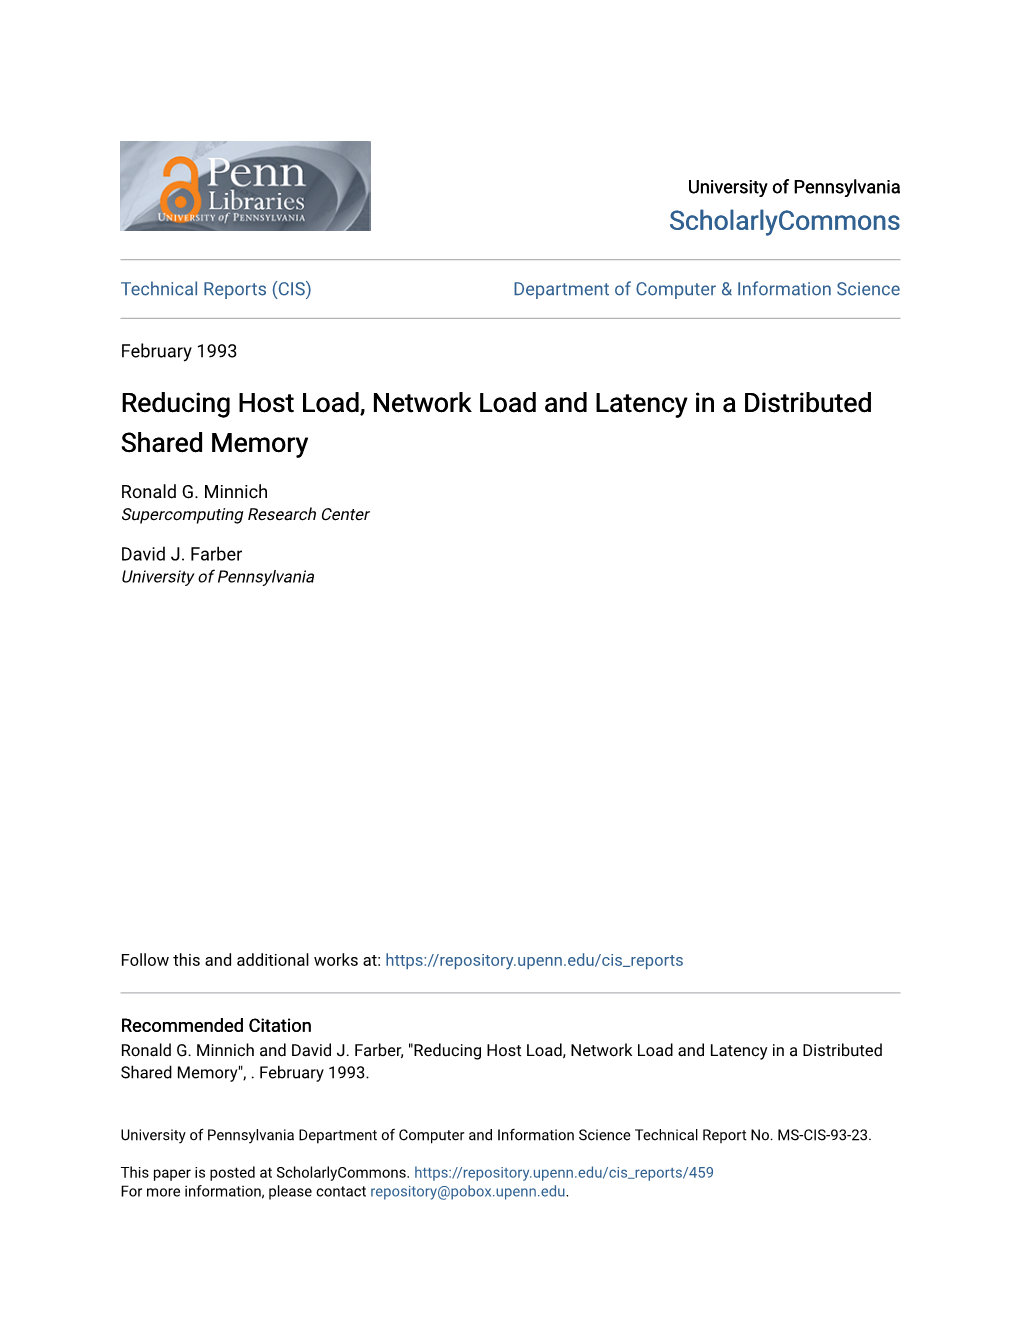 Reducing Host Load, Network Load and Latency in a Distributed Shared Memory